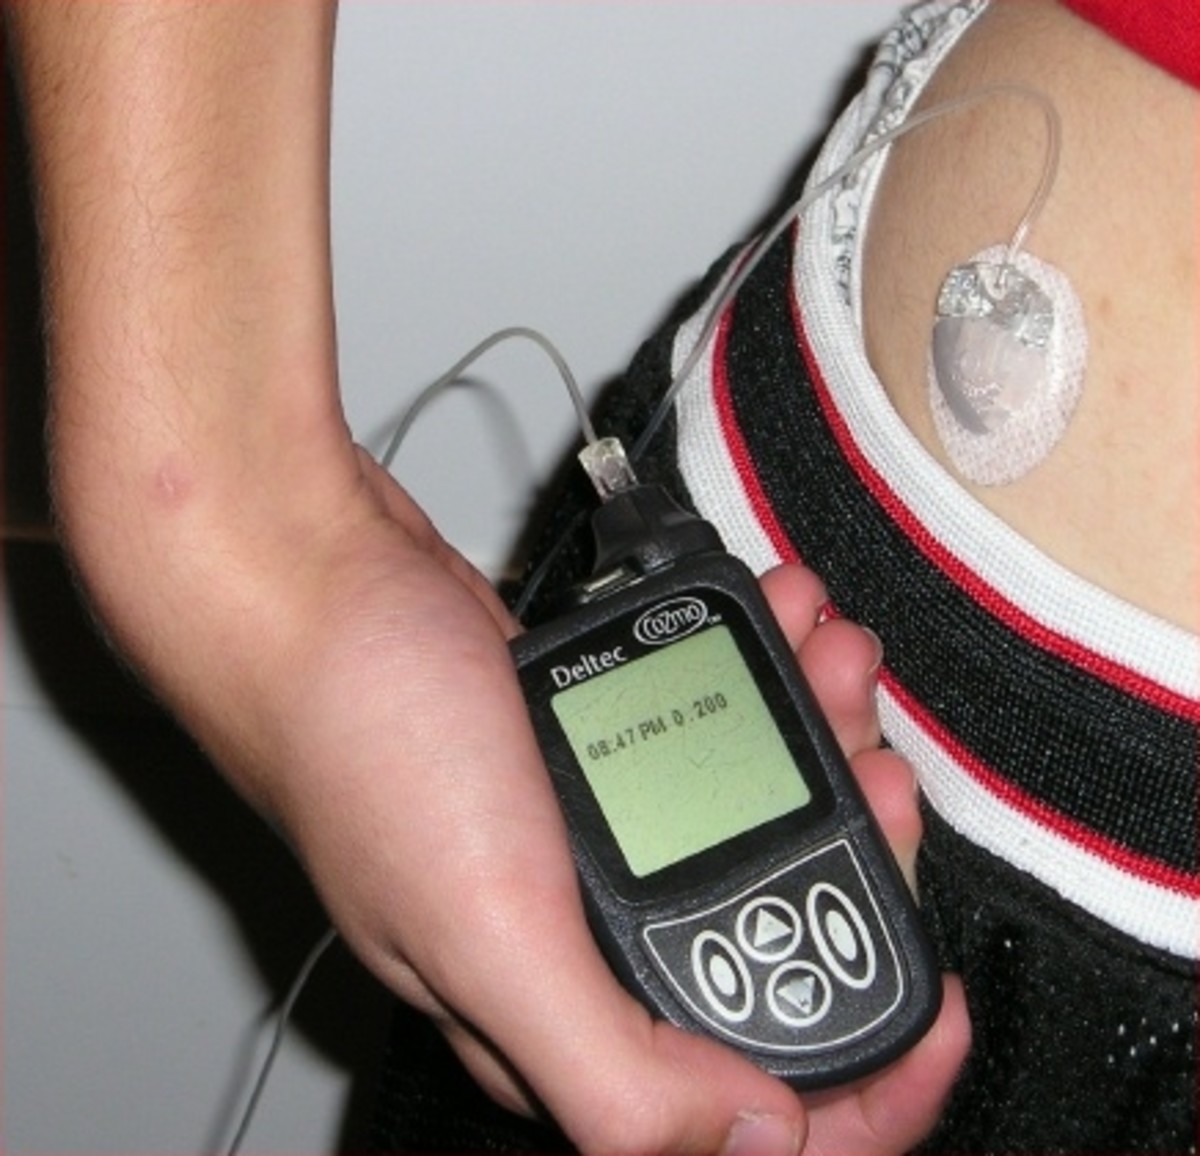 A person with diabetes using an insulin pump is pictured here.